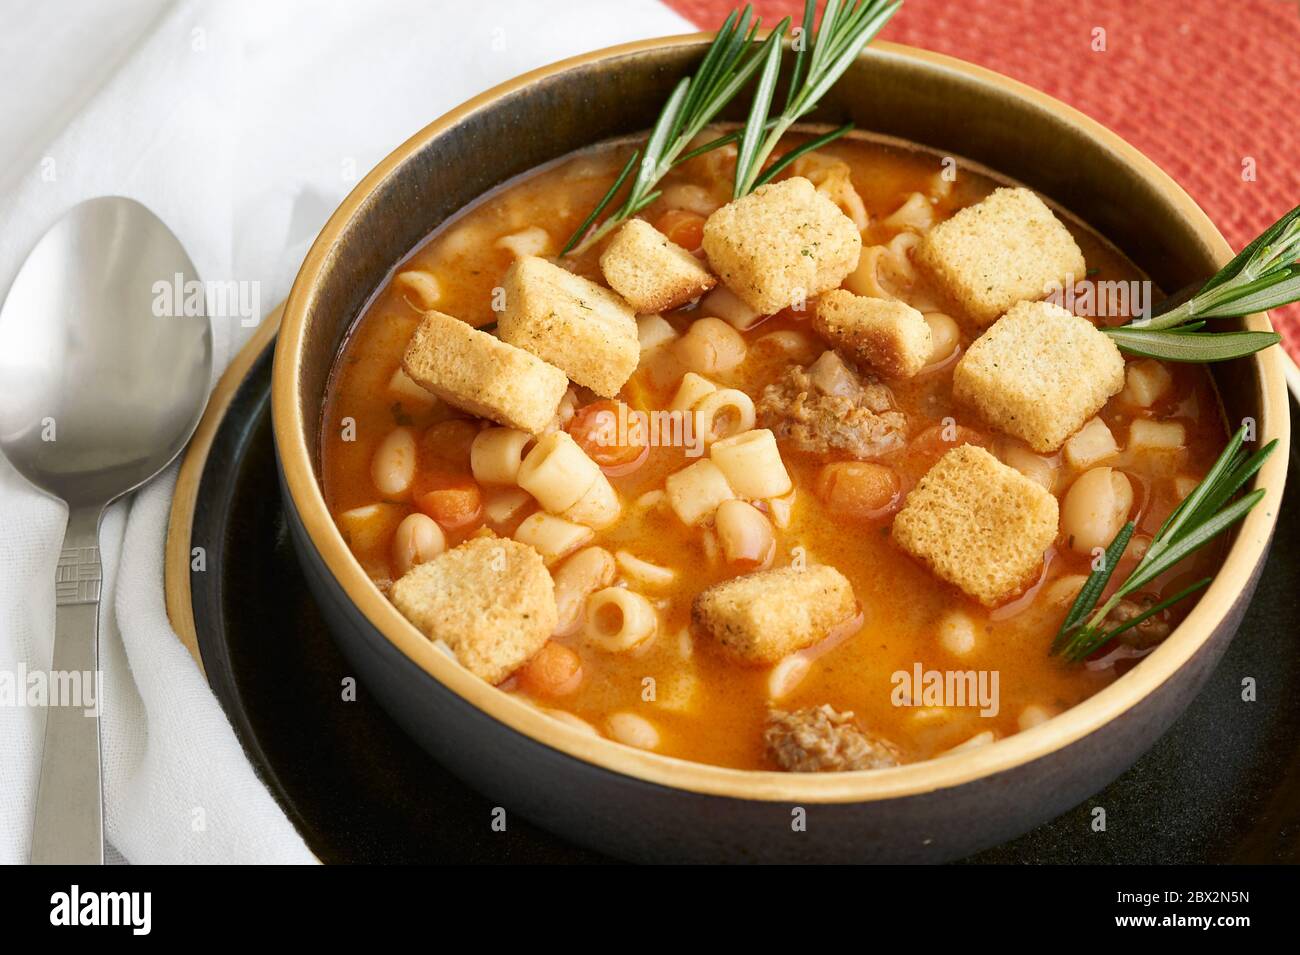 Pasta Fagioli authentic Italian soup made with beans, pasta and sausage. Stock Photo